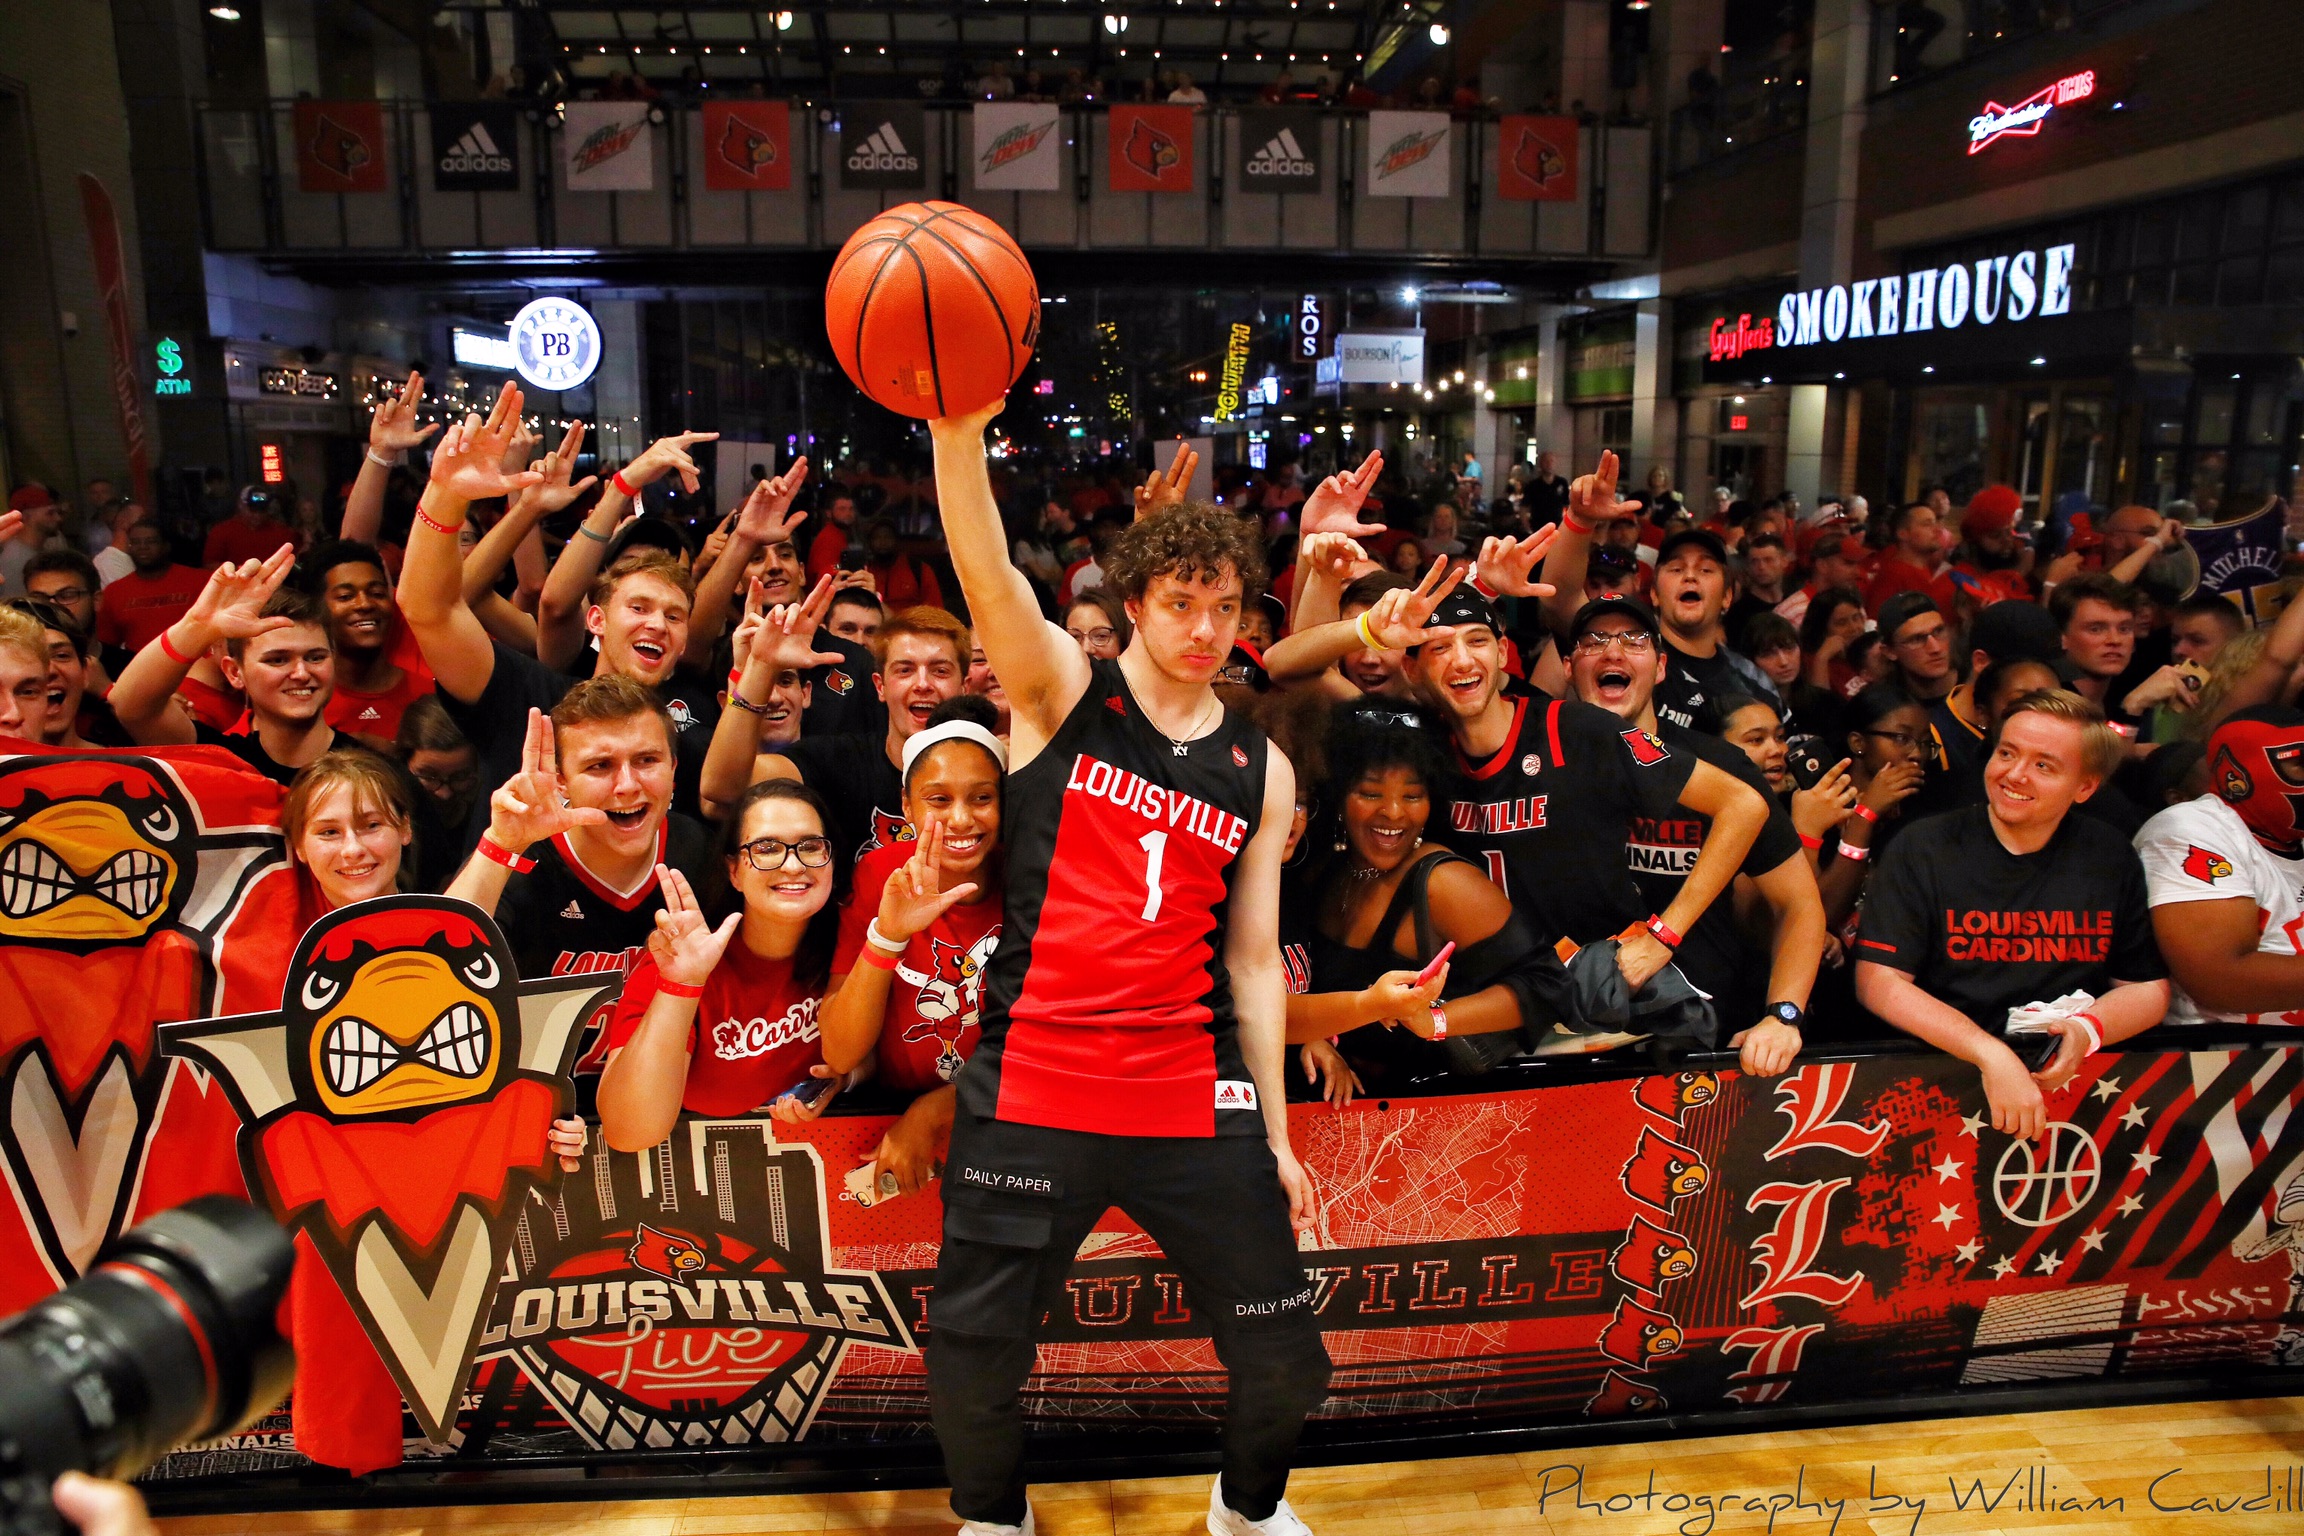 Louisville Live Features Three-Point, Dunk Contests for Live Telecast